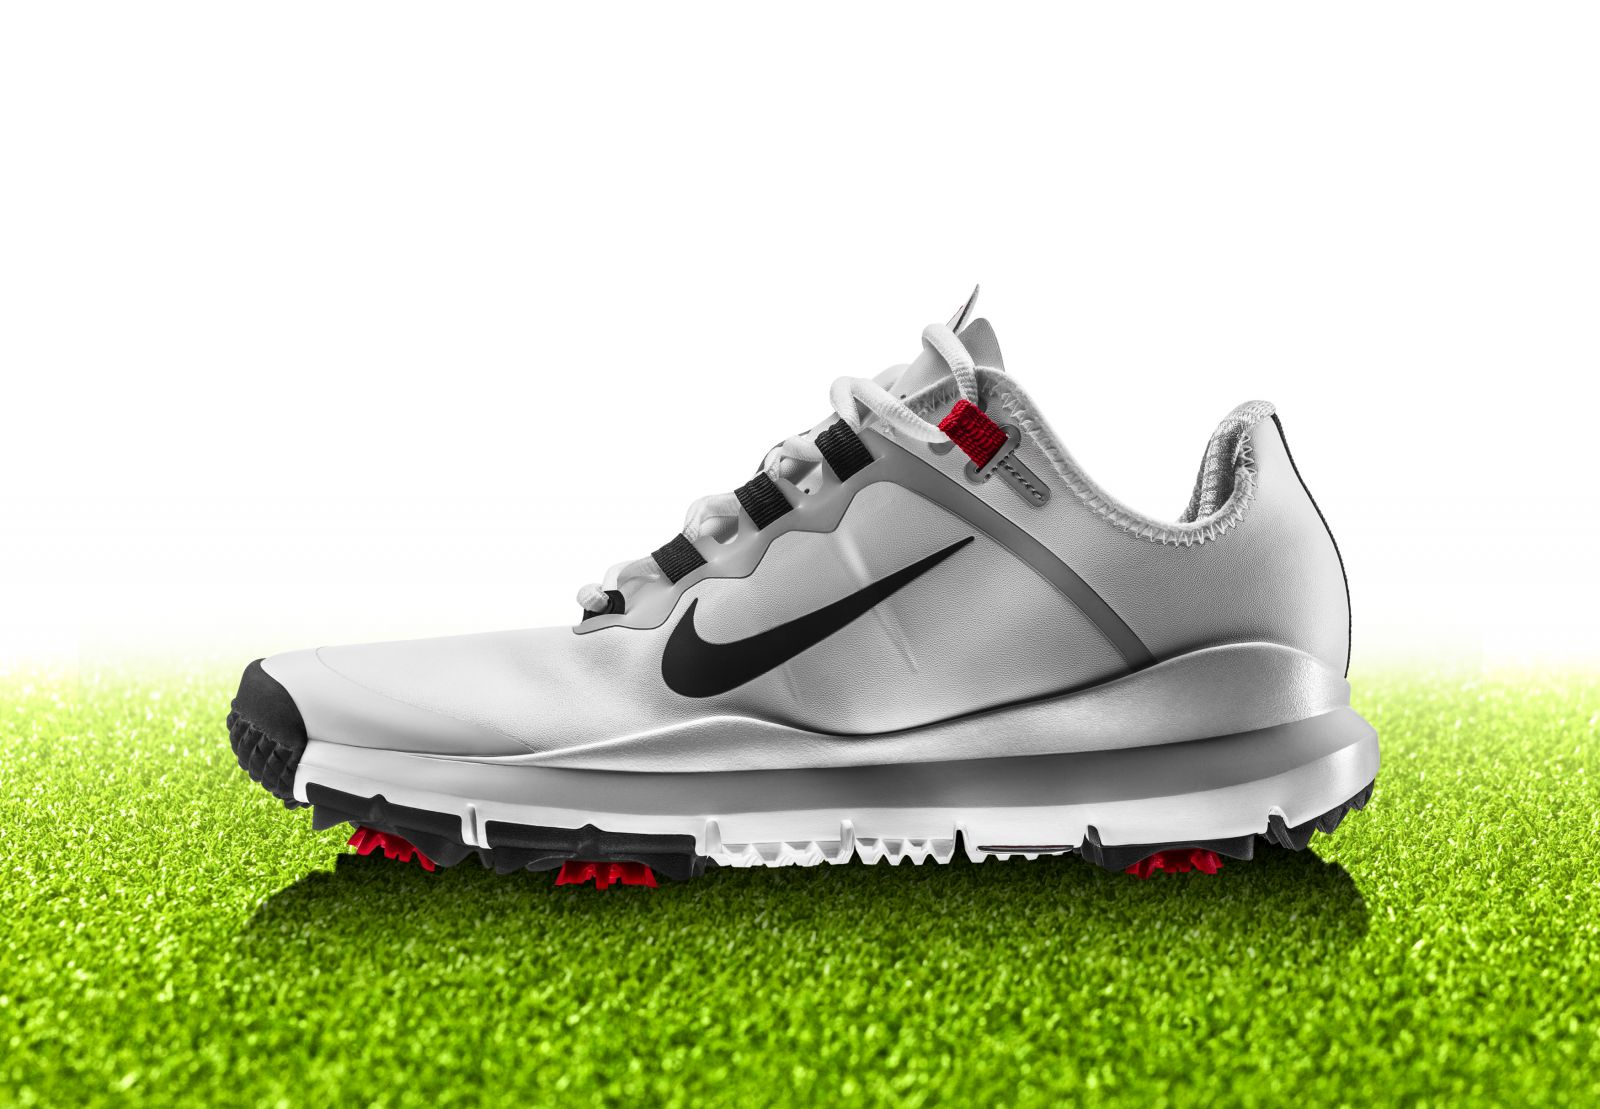 Nike TW '13 Tiger Woods' Nike FREEInspired Golf Shoe Sole Collector